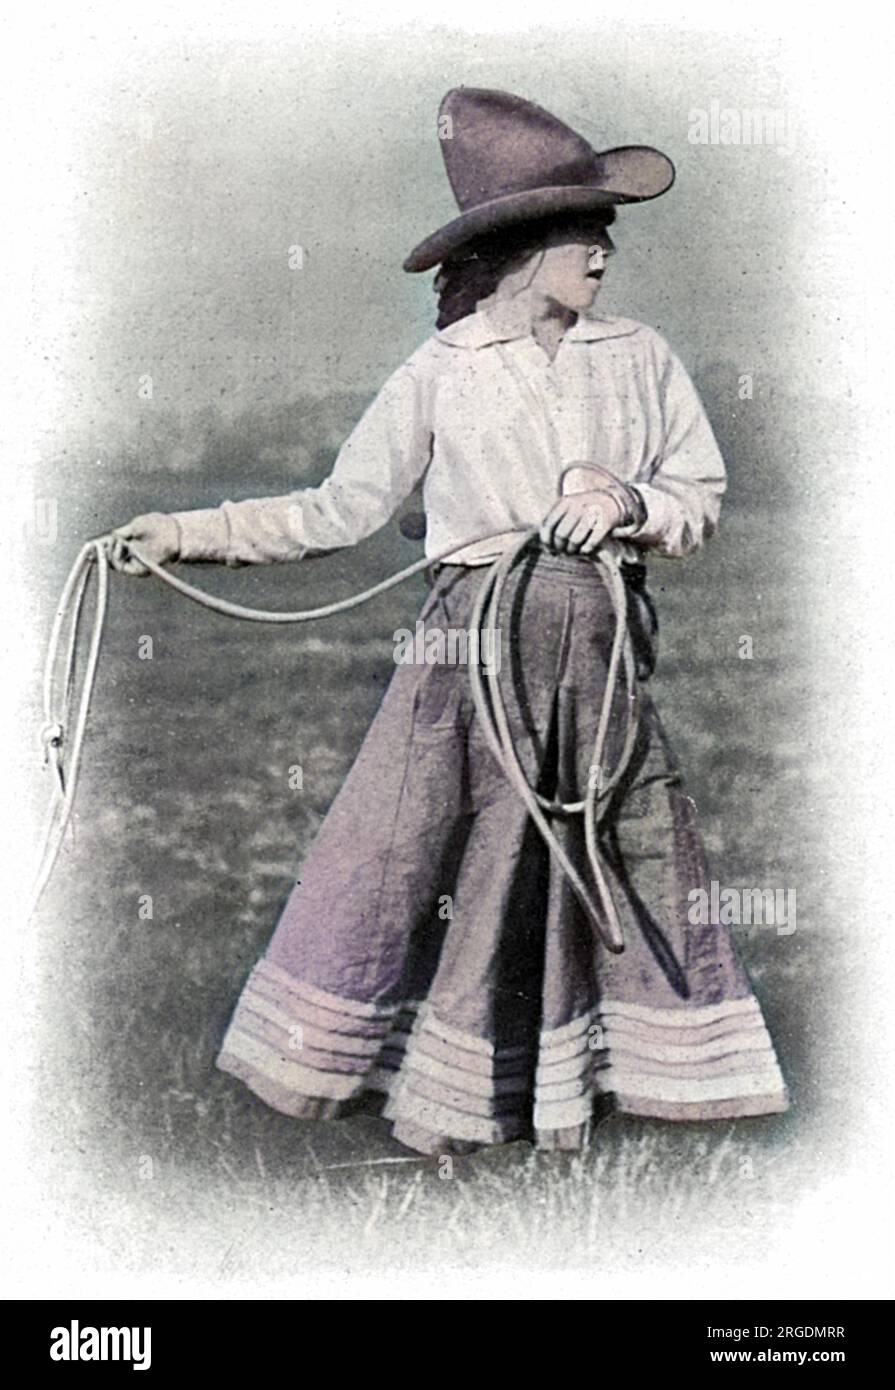 A war worker, Miss Poppette Ginnette, who was formerly a circus rider, seen with a lasso, in her role helping her father break in Army horses in  London suburb during the First World War. Stock Photo